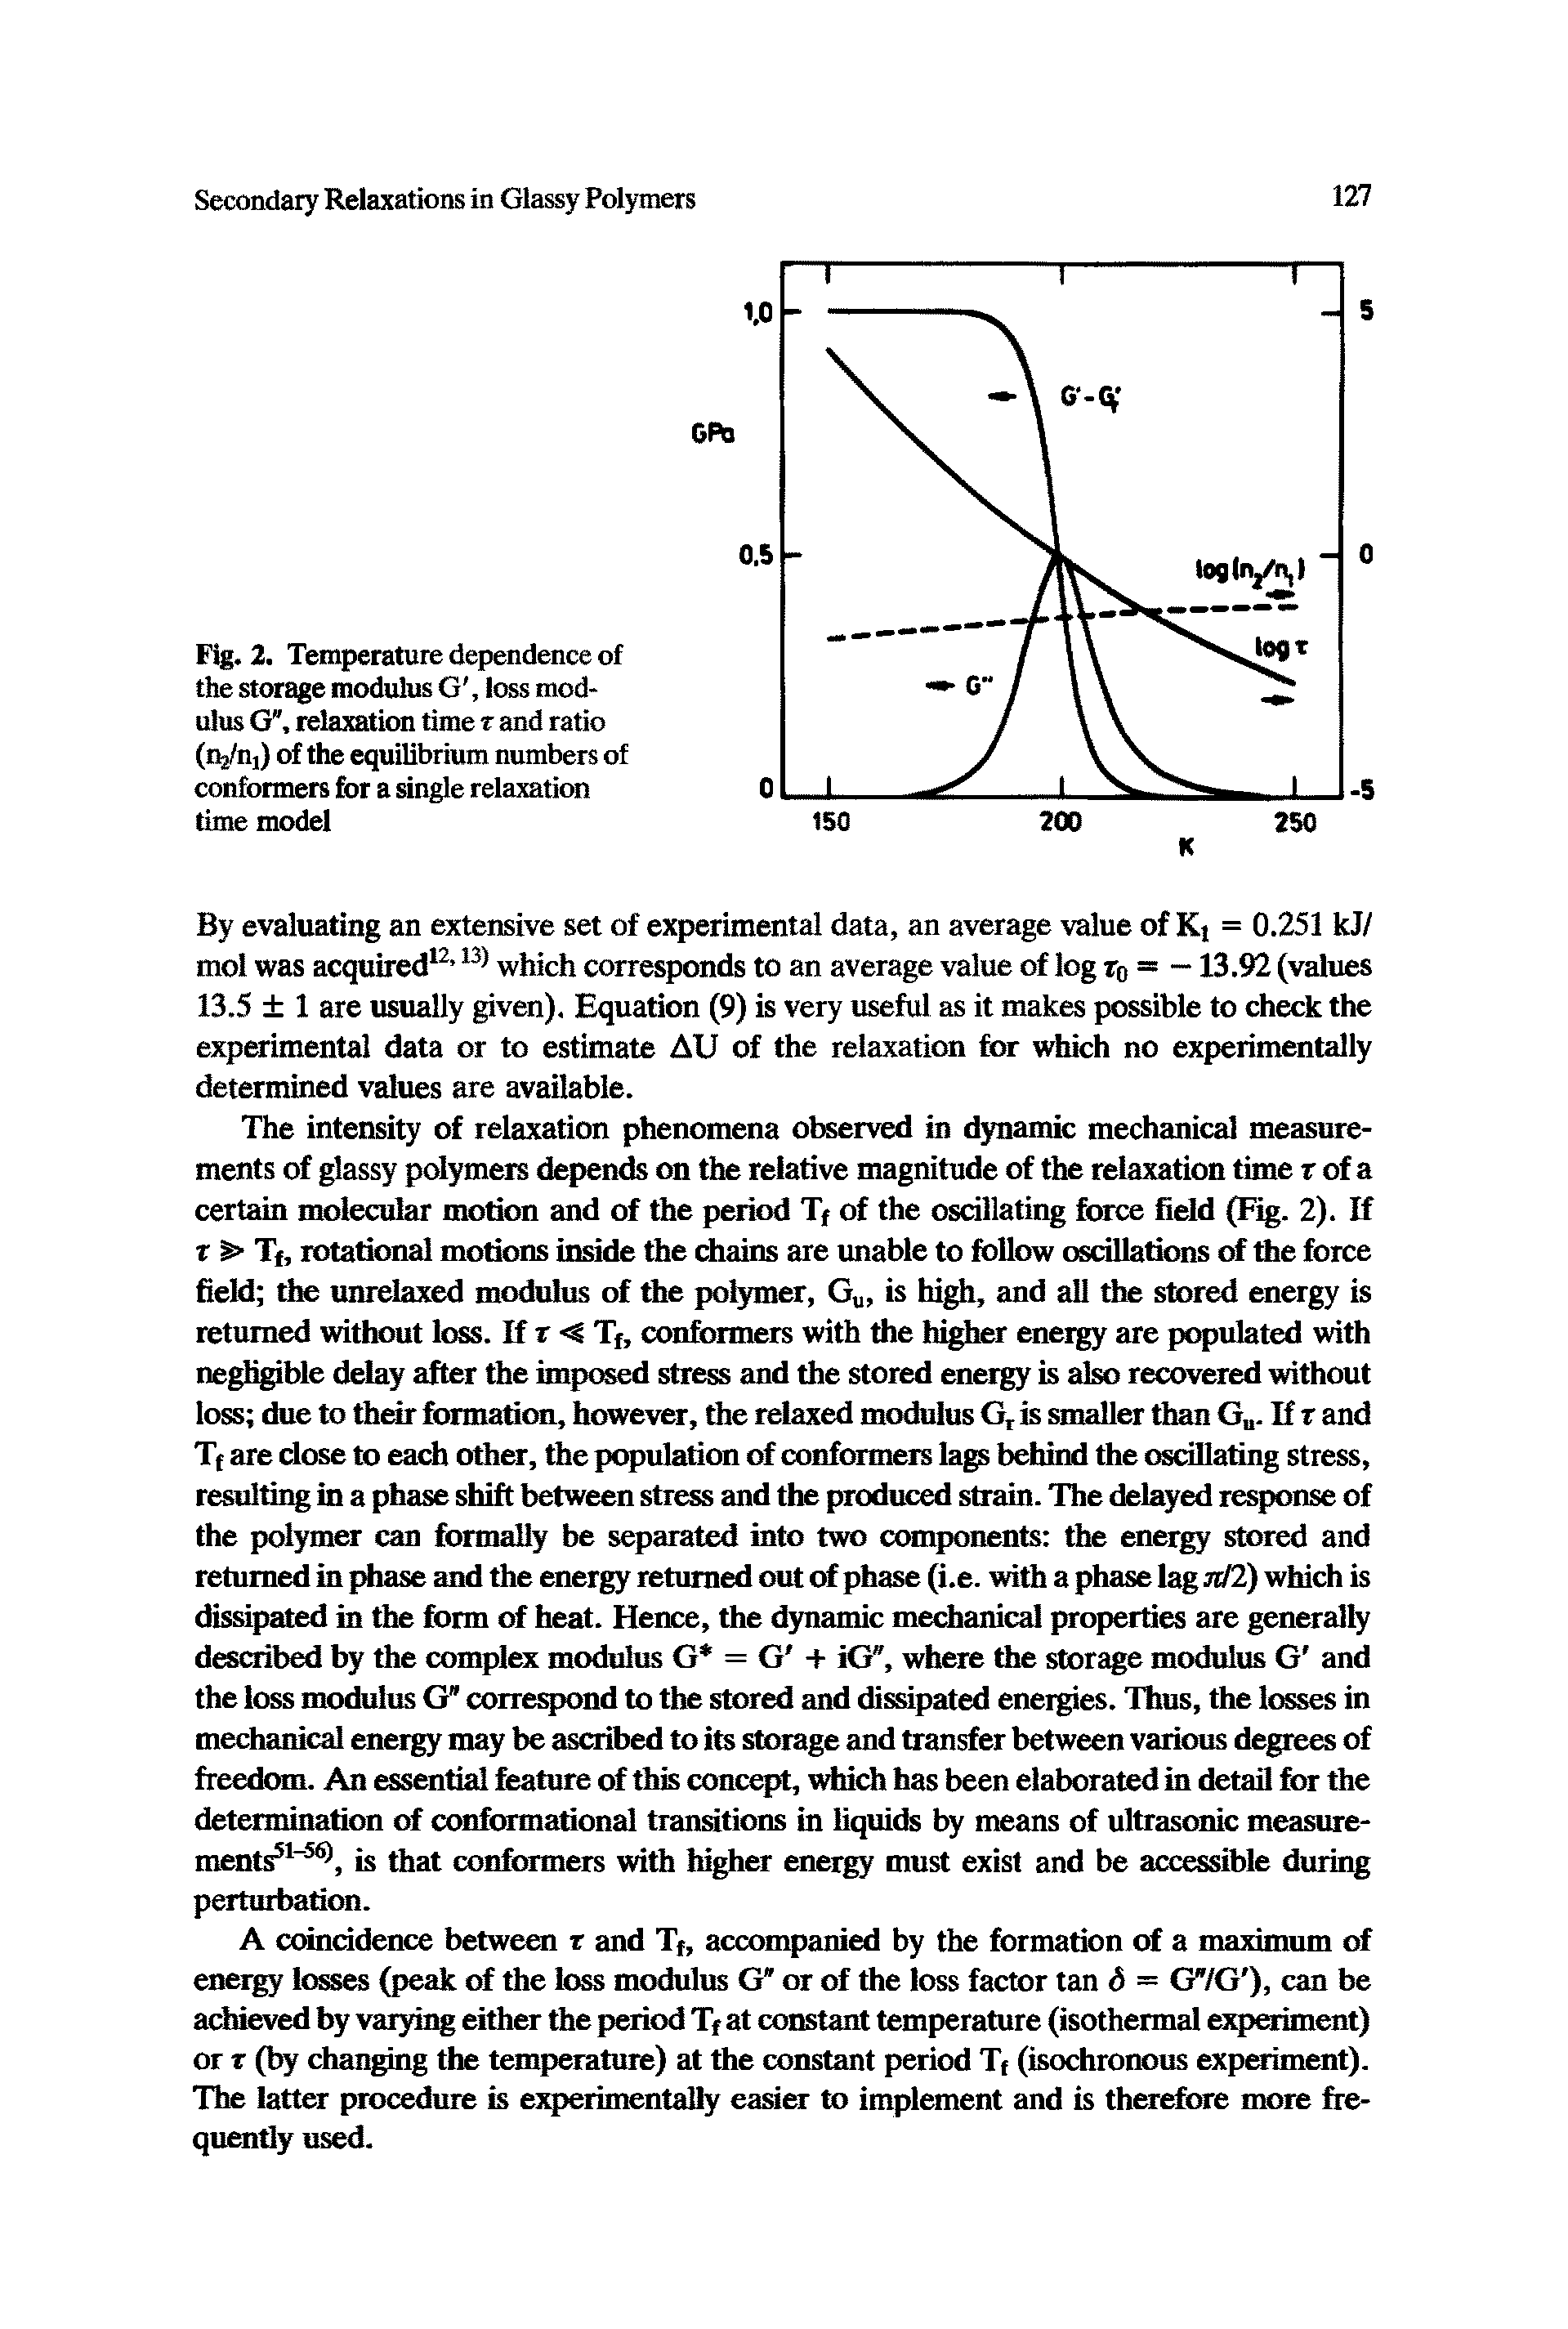 Fig. 2. Temperature dependence of the storage modulus G, loss modulus G", relaxation time t and ratio (n2/nj) of the equilibrium numbers of conformers for a single relaxation time model...